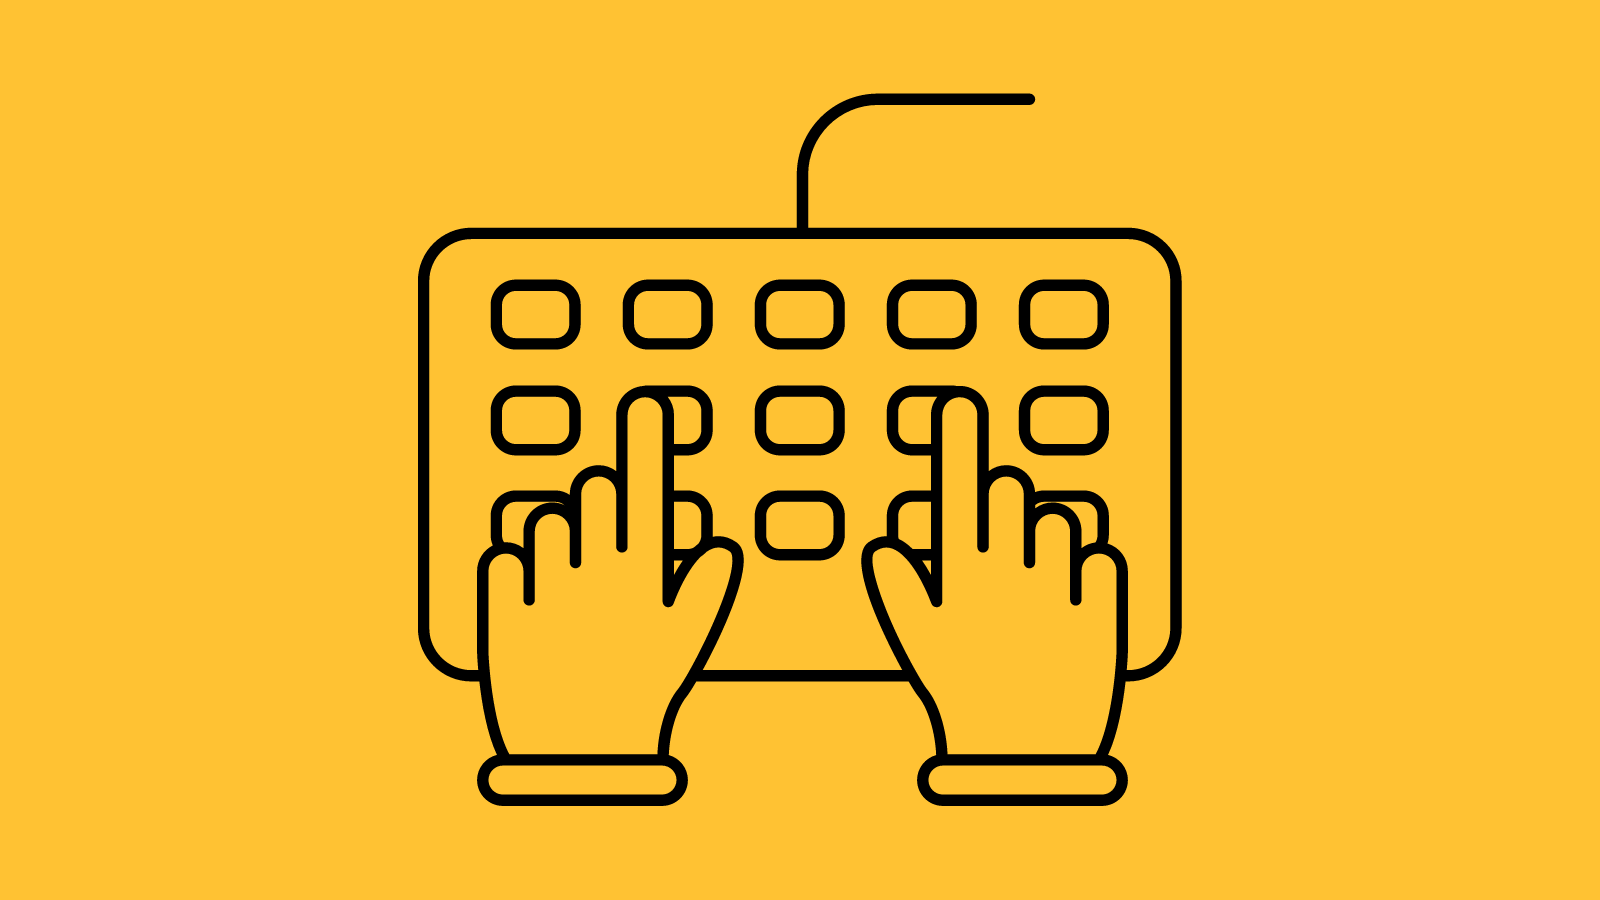 A graphic of hands on a keyboard